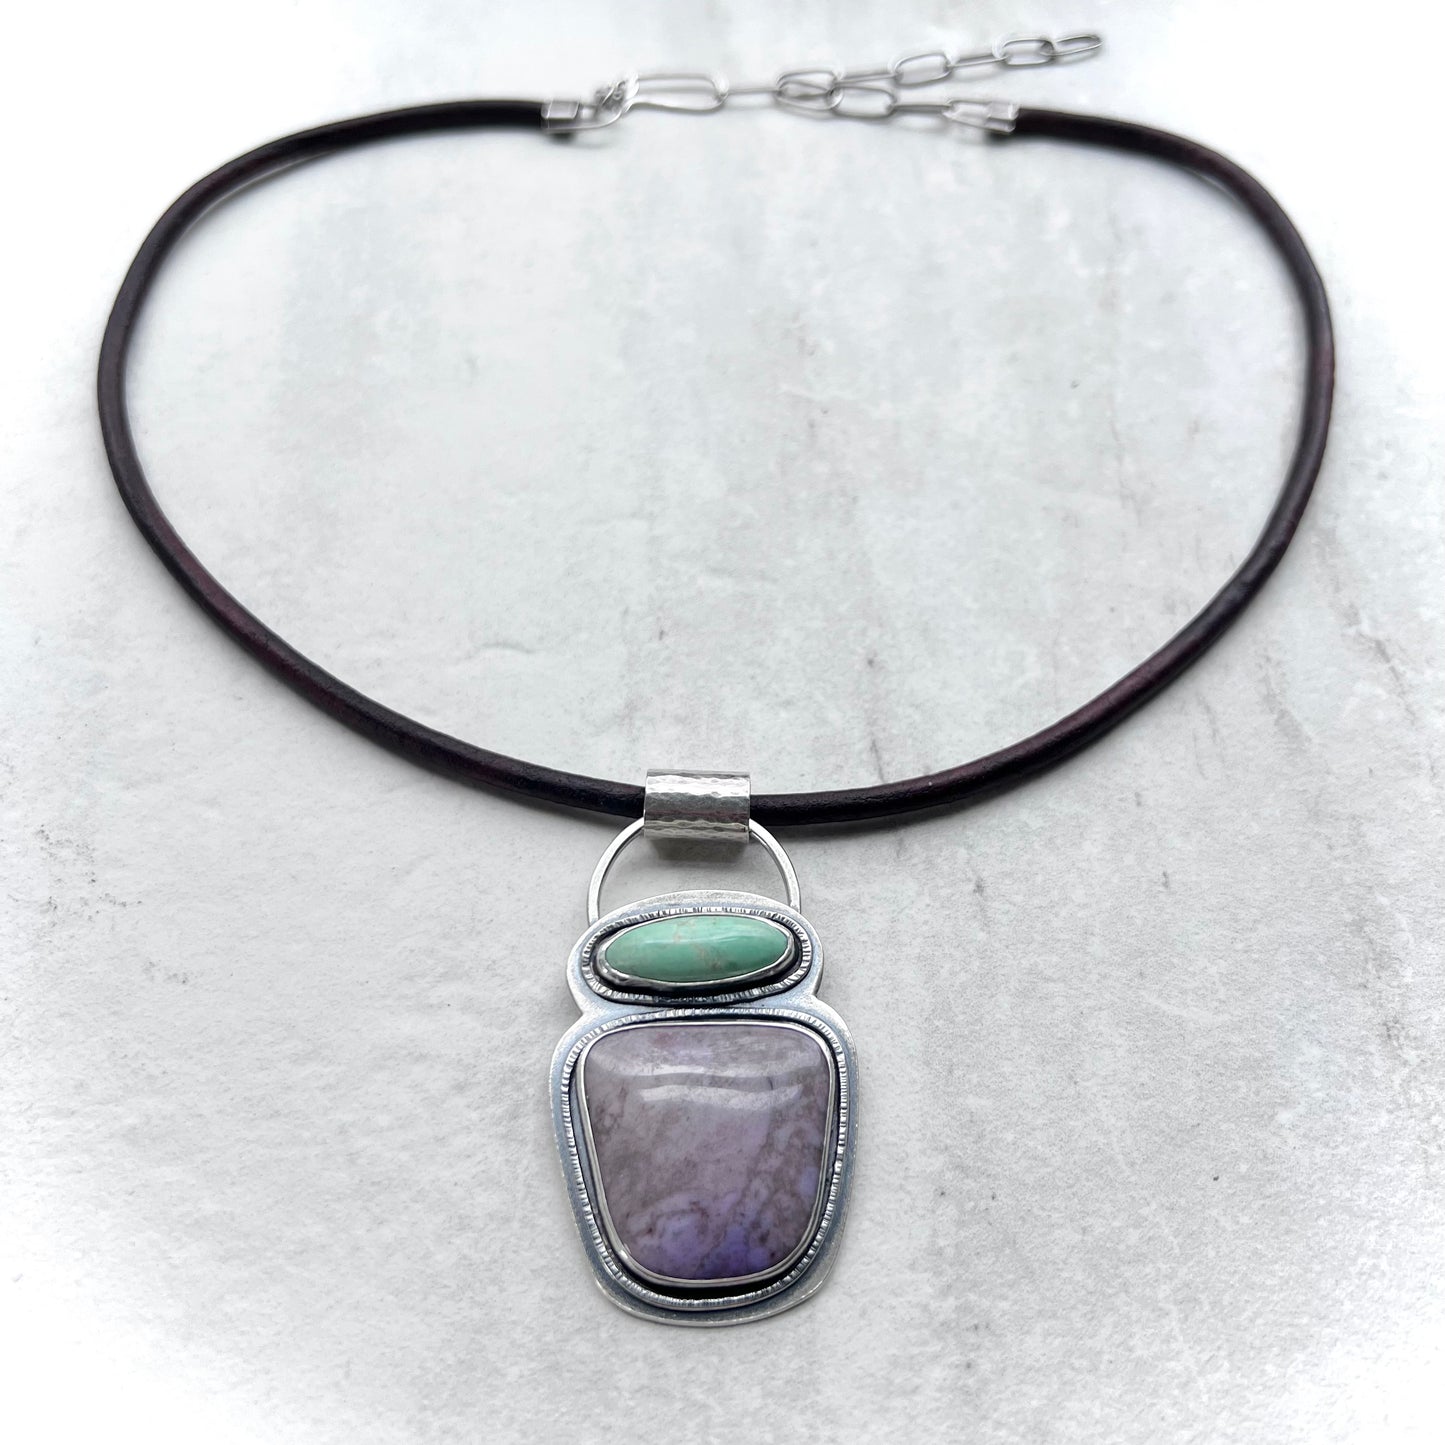 Variscite and Jade Sterling Silver Necklace - Handmade One-of-a-kind Pendant on Genuine Leather